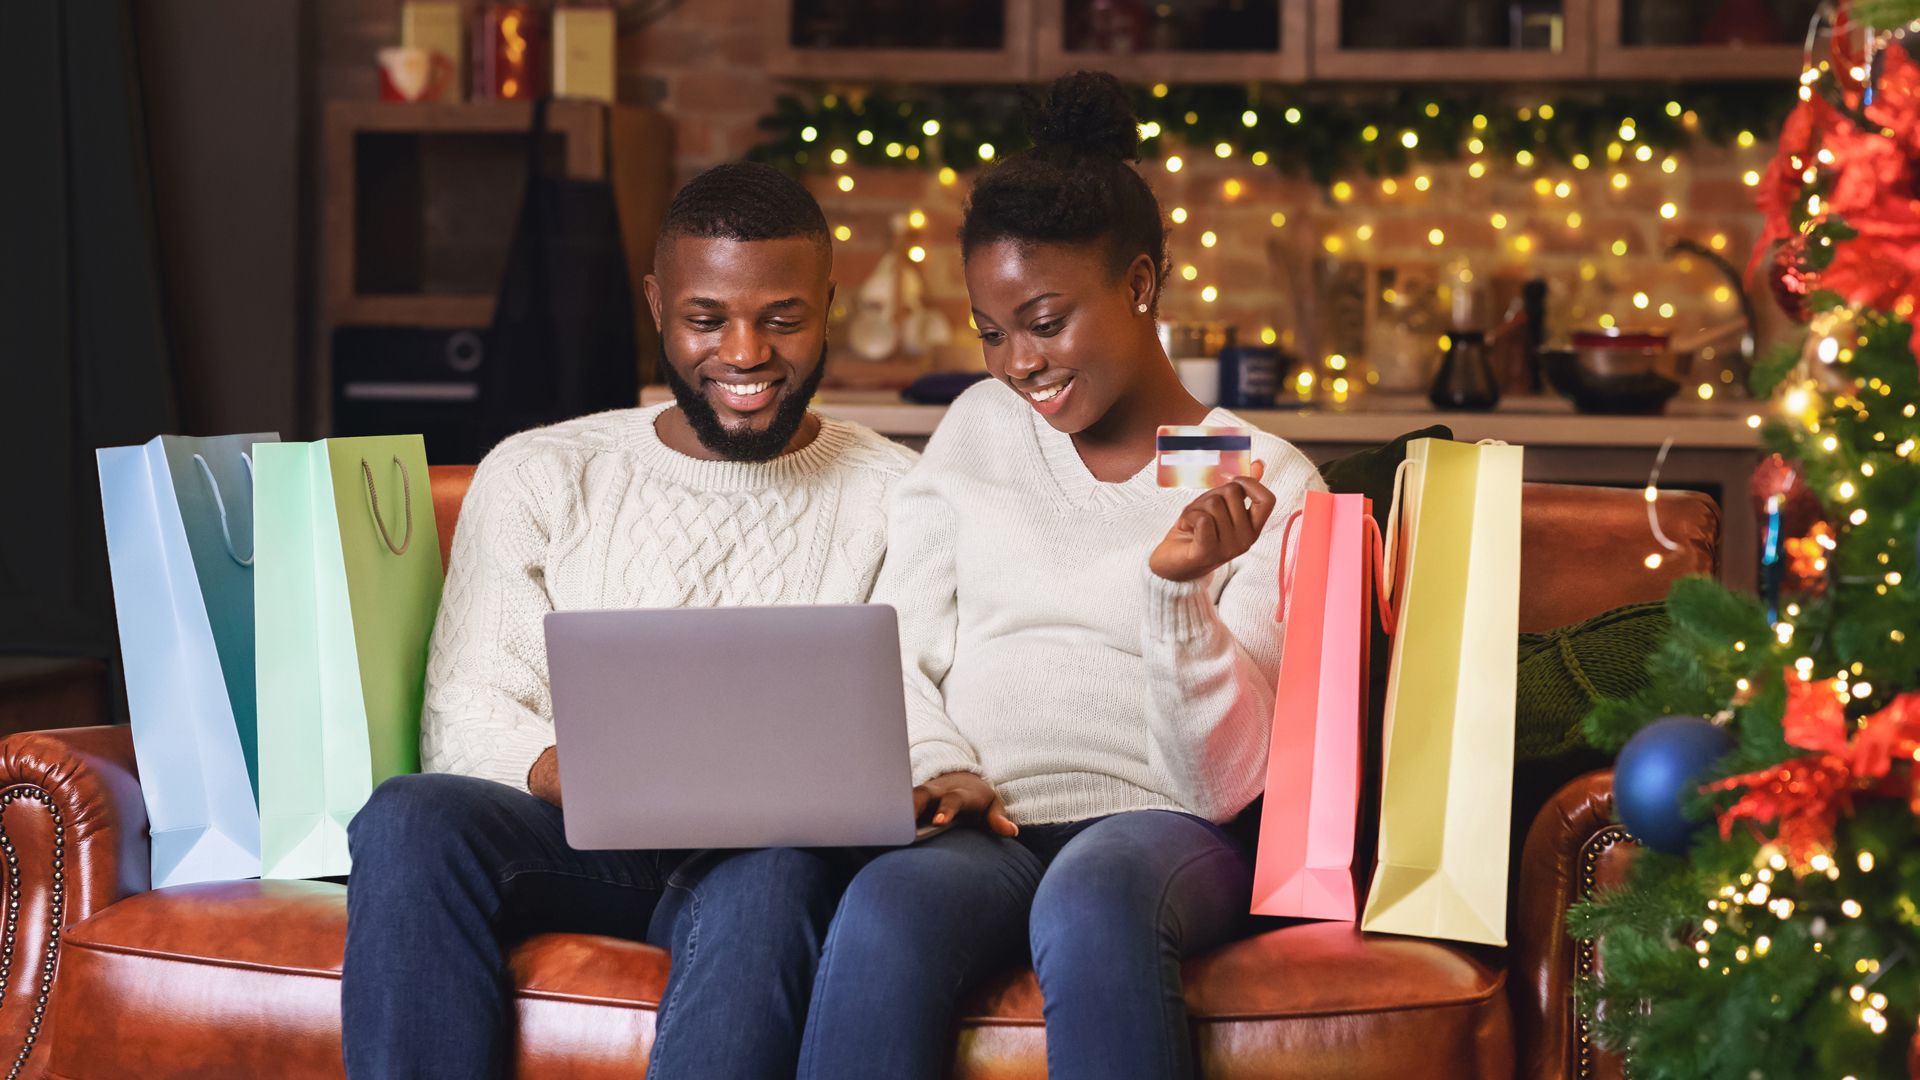 Best credit cards for holiday shopping in 2021